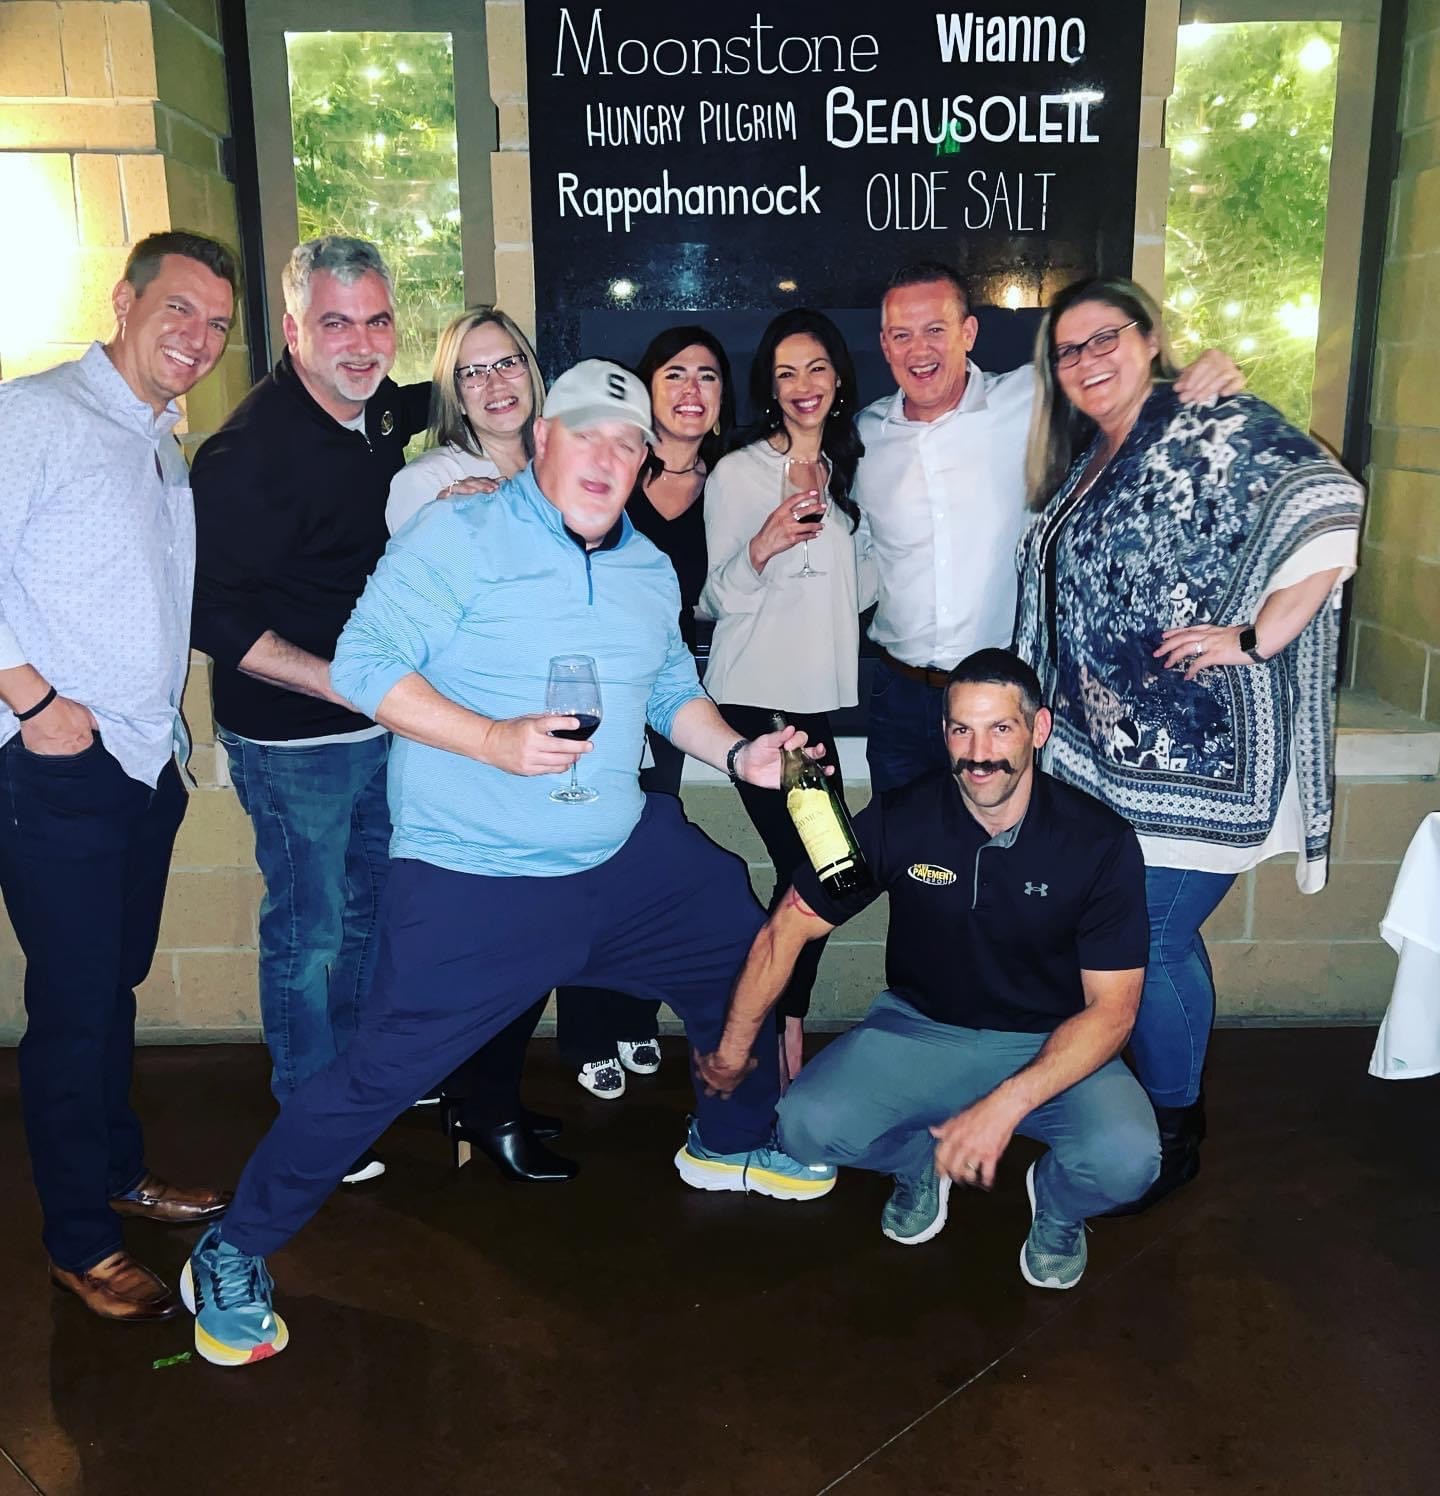 At TPG, one of our core values is FUN and this group always over delivers in that category!